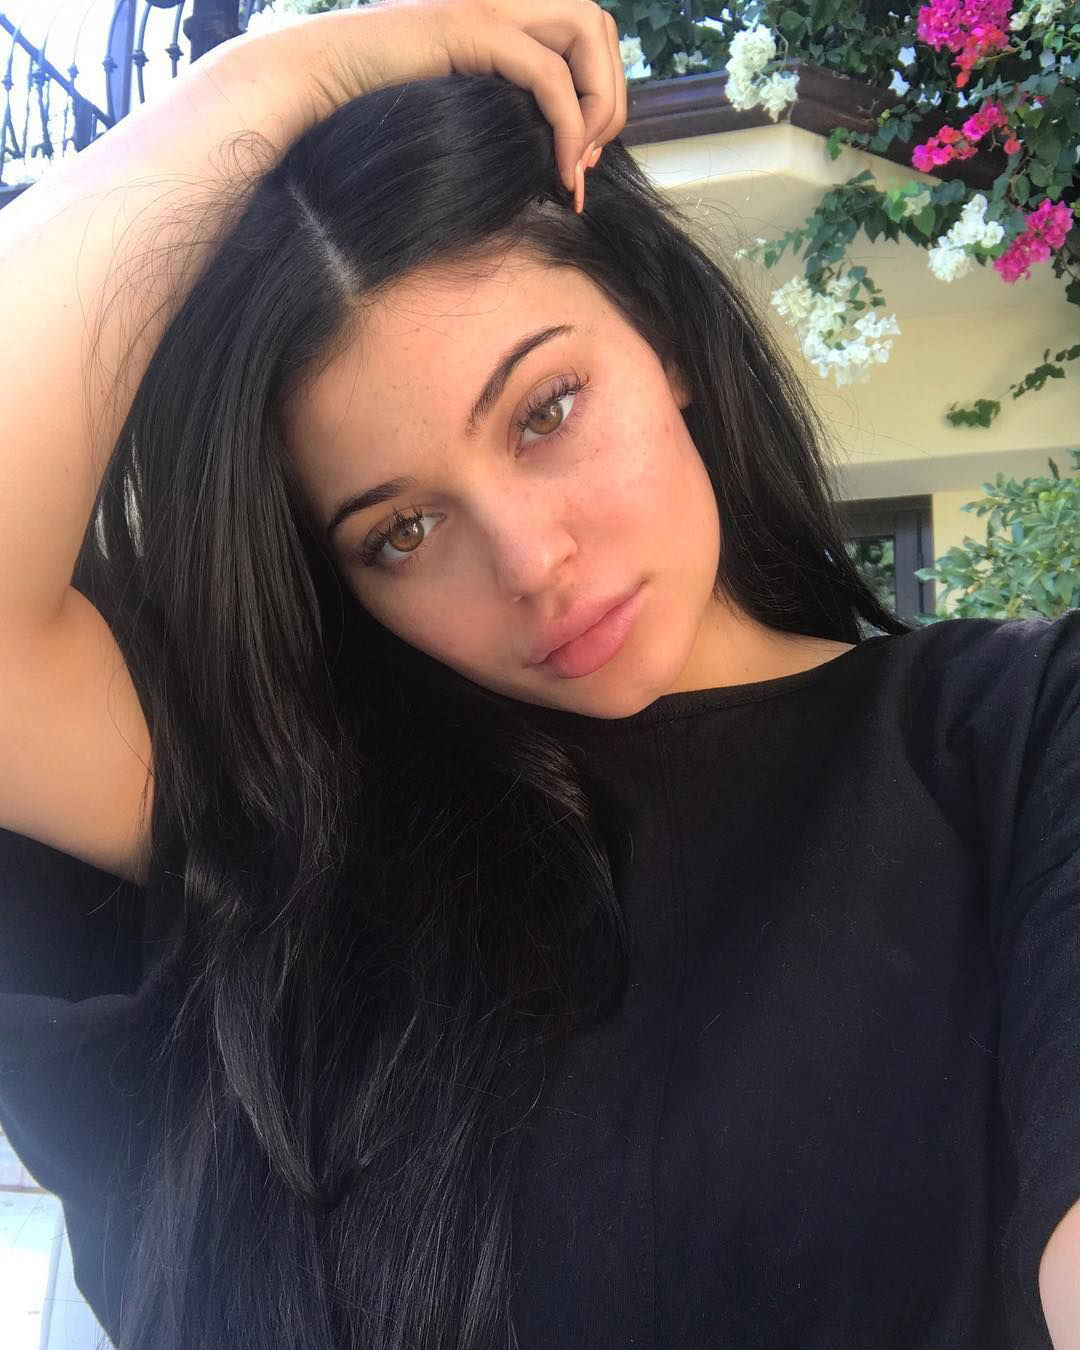 Kylie Jenner 2017 Wallpapers